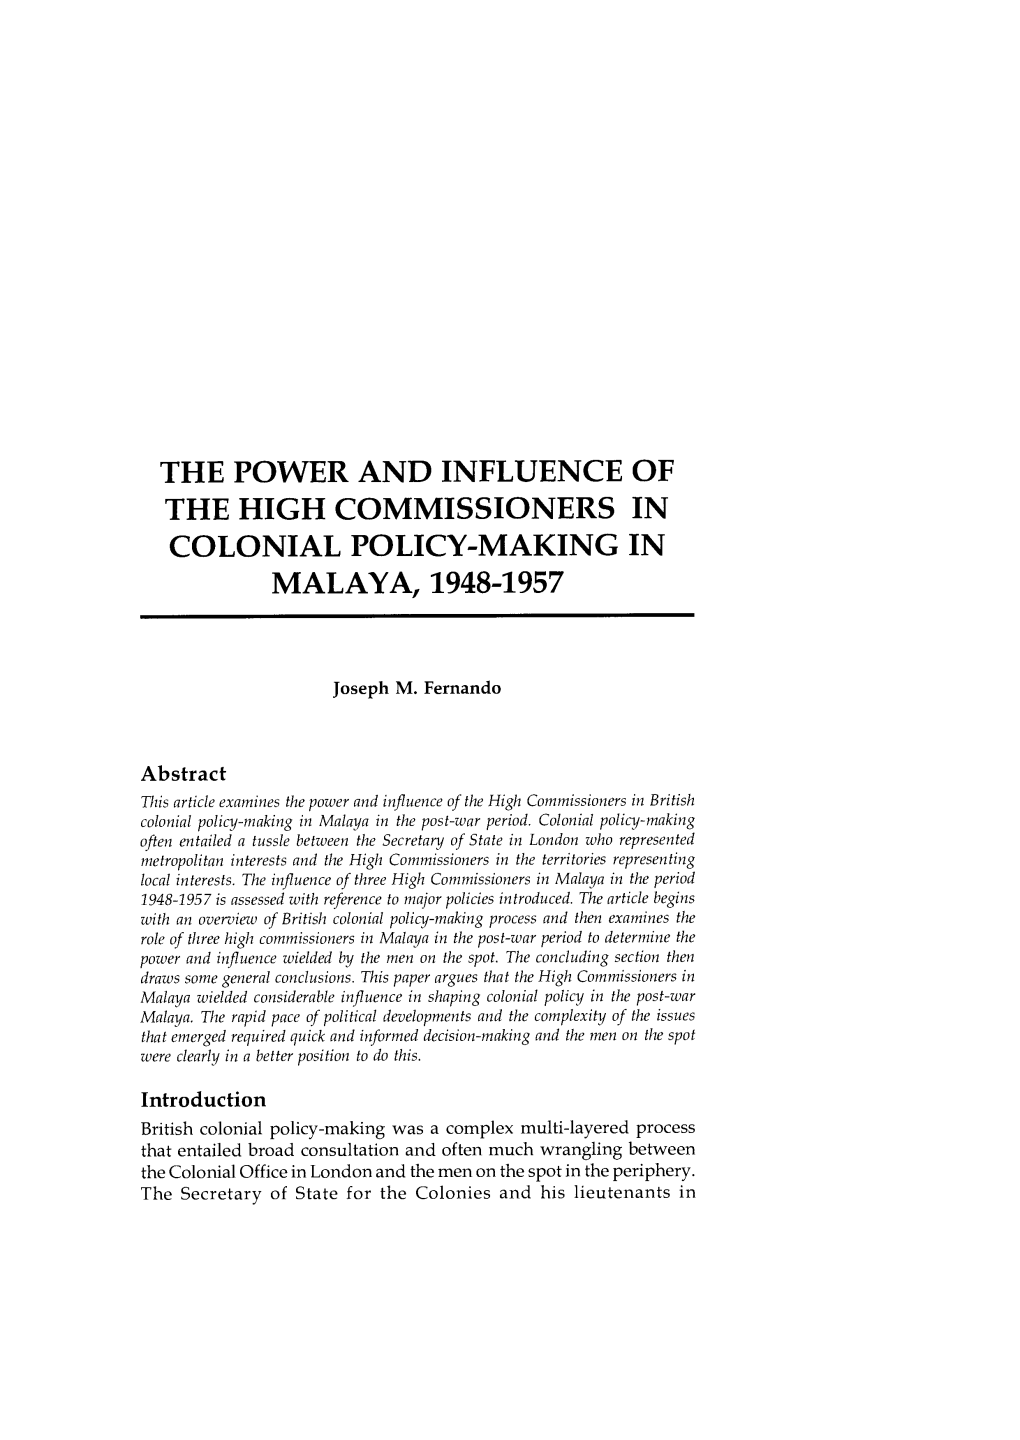 The Power and Influence of the High Commissioners in Colonial Policy-Making in Malaya, 1948-1957